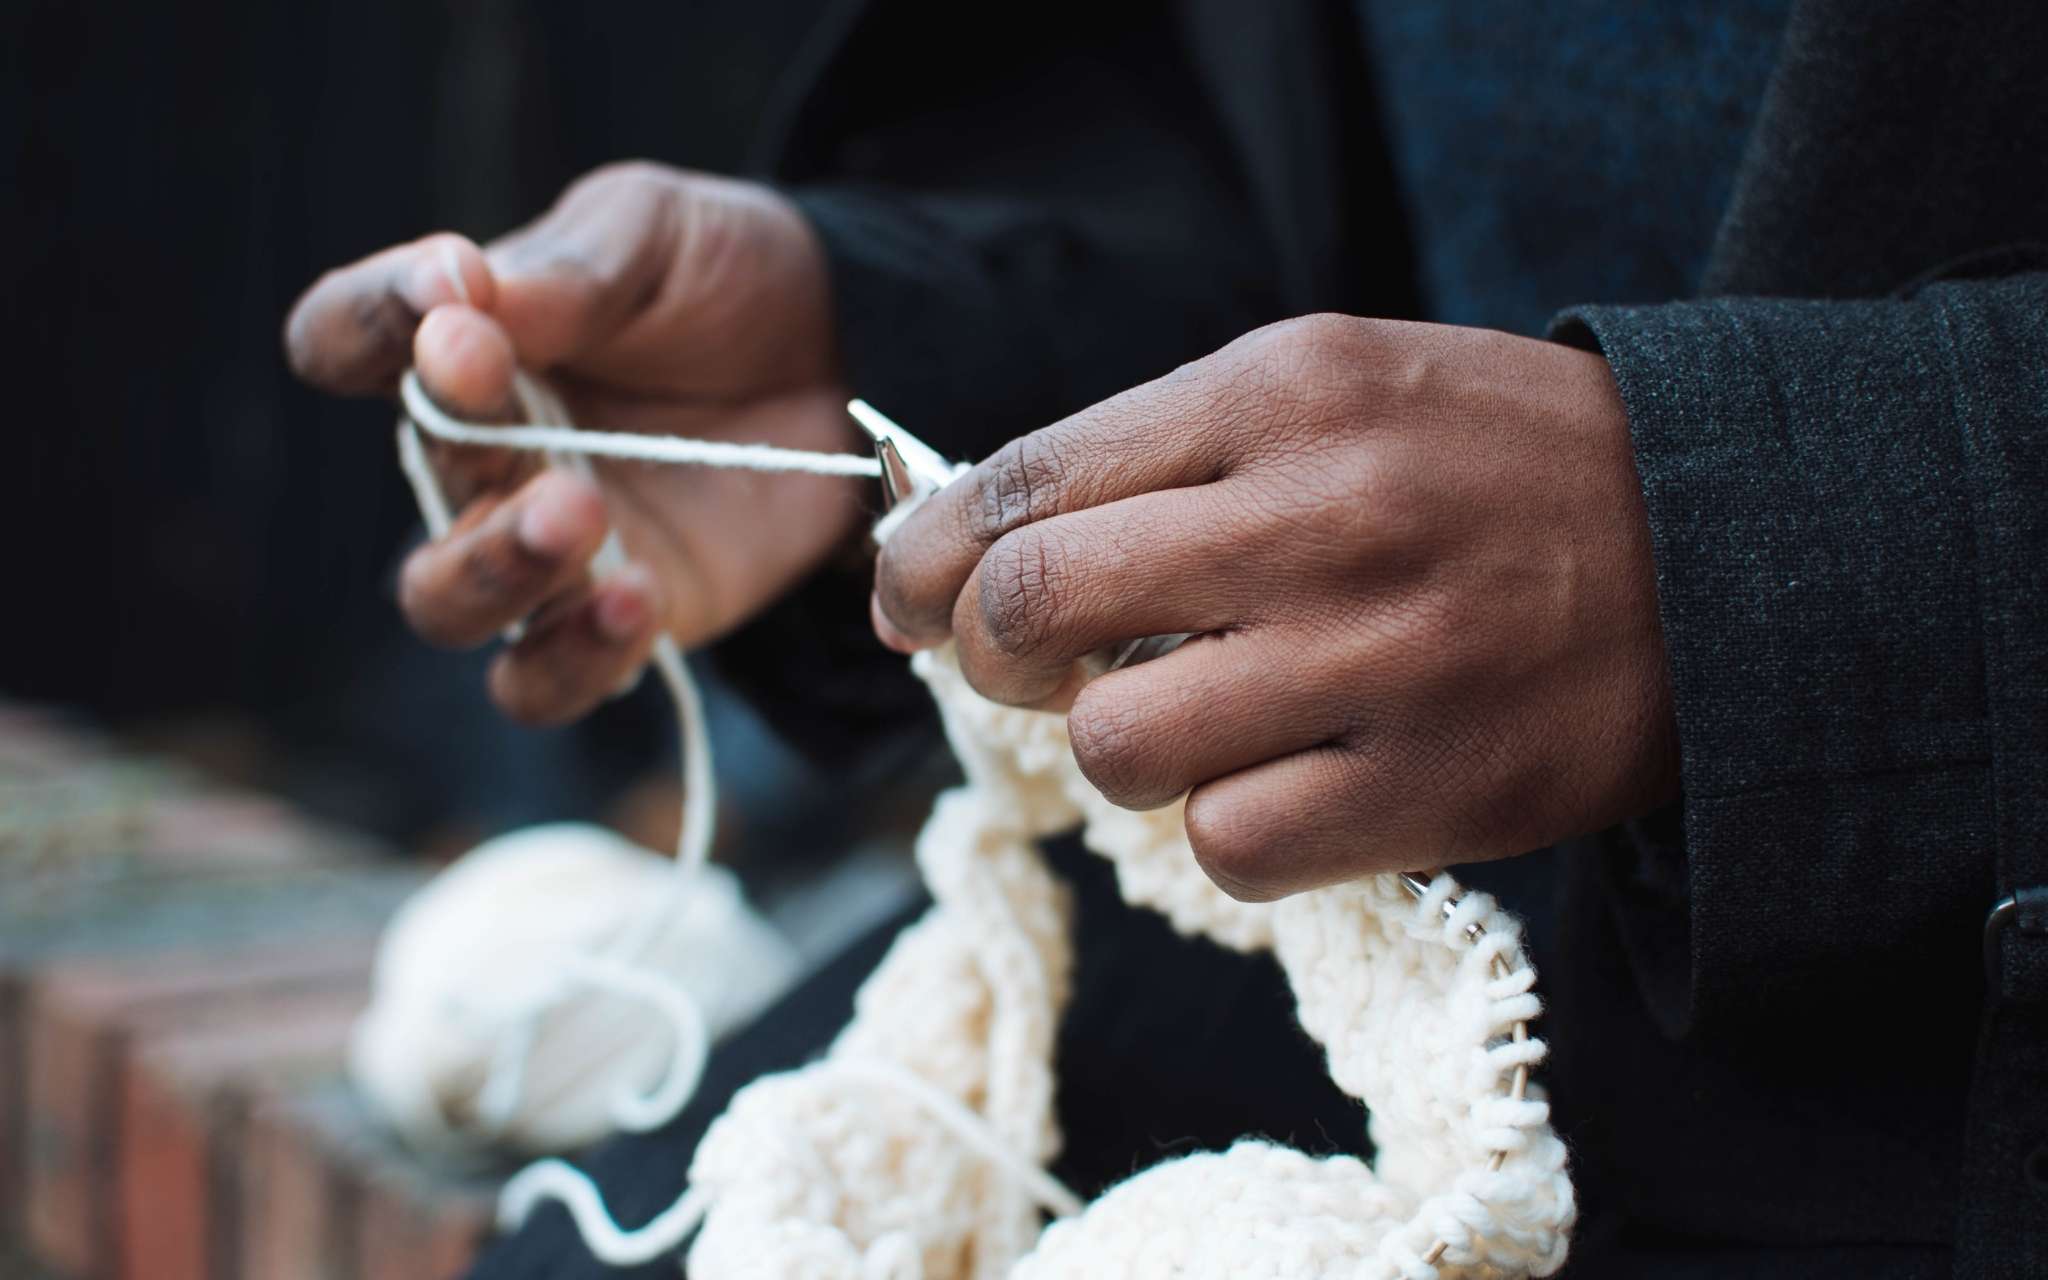 A black person knits on a white sweater with circular needs, the ball of yarn lies on a wall to the side.